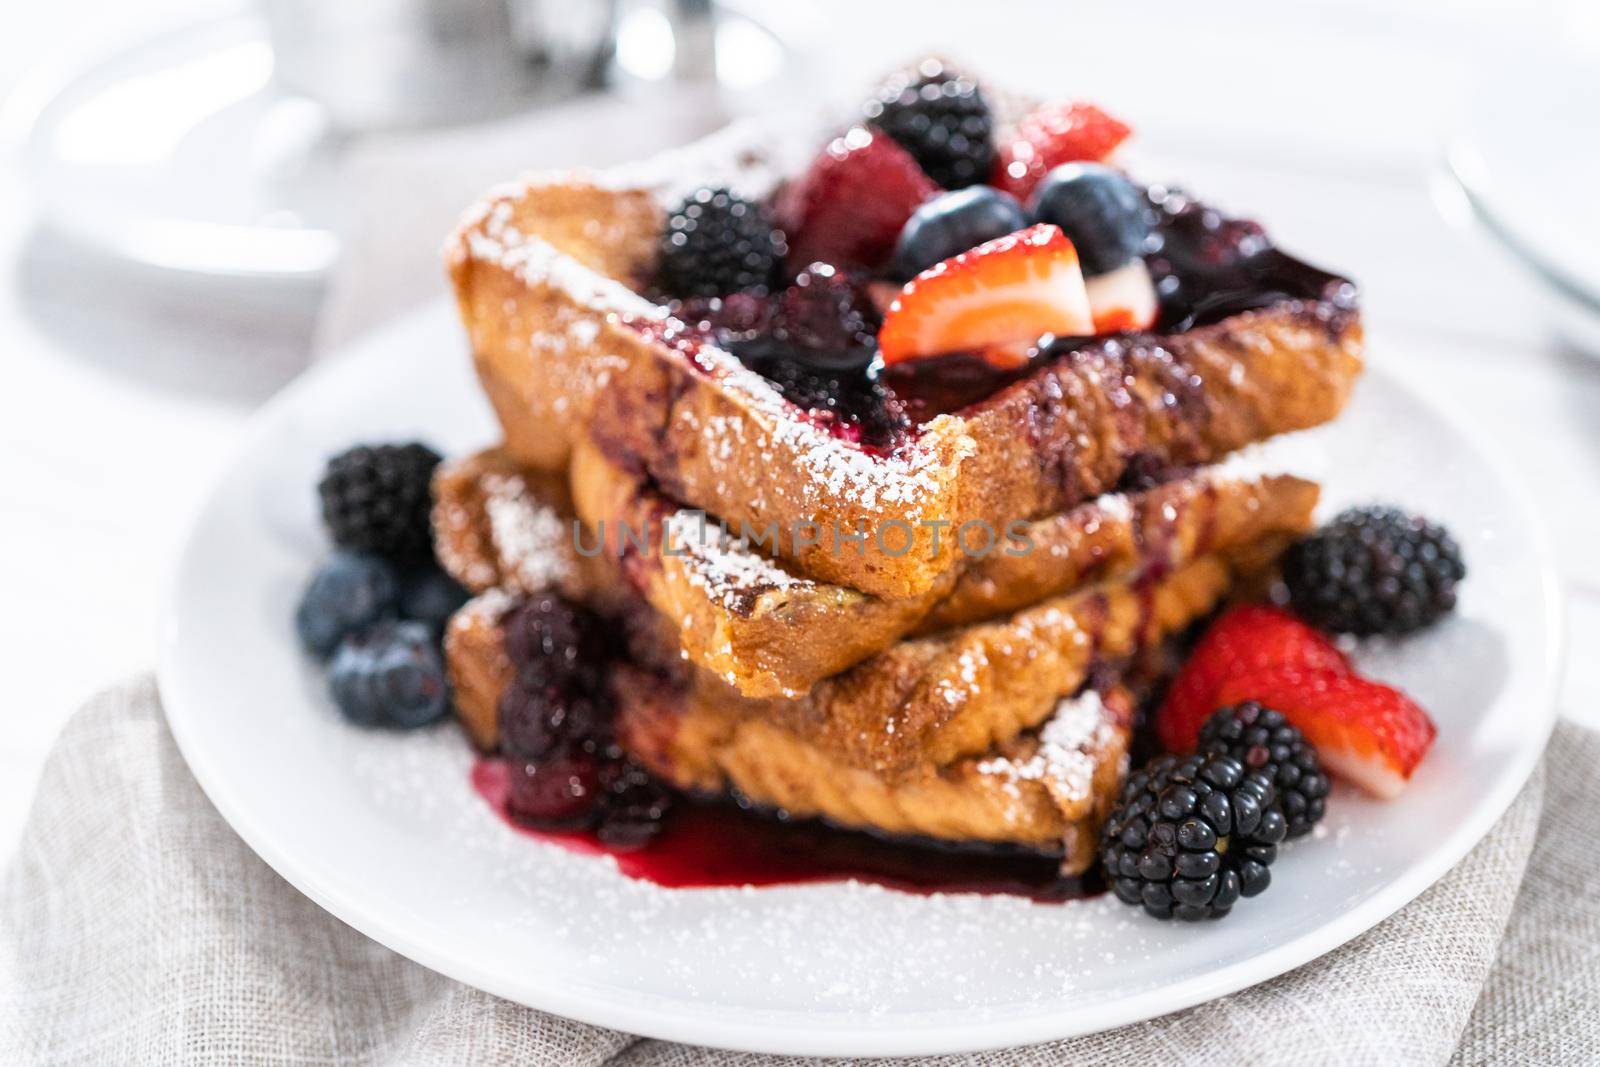 Stack of freshly made french toast garnished with mix berry compote and powder sugar.